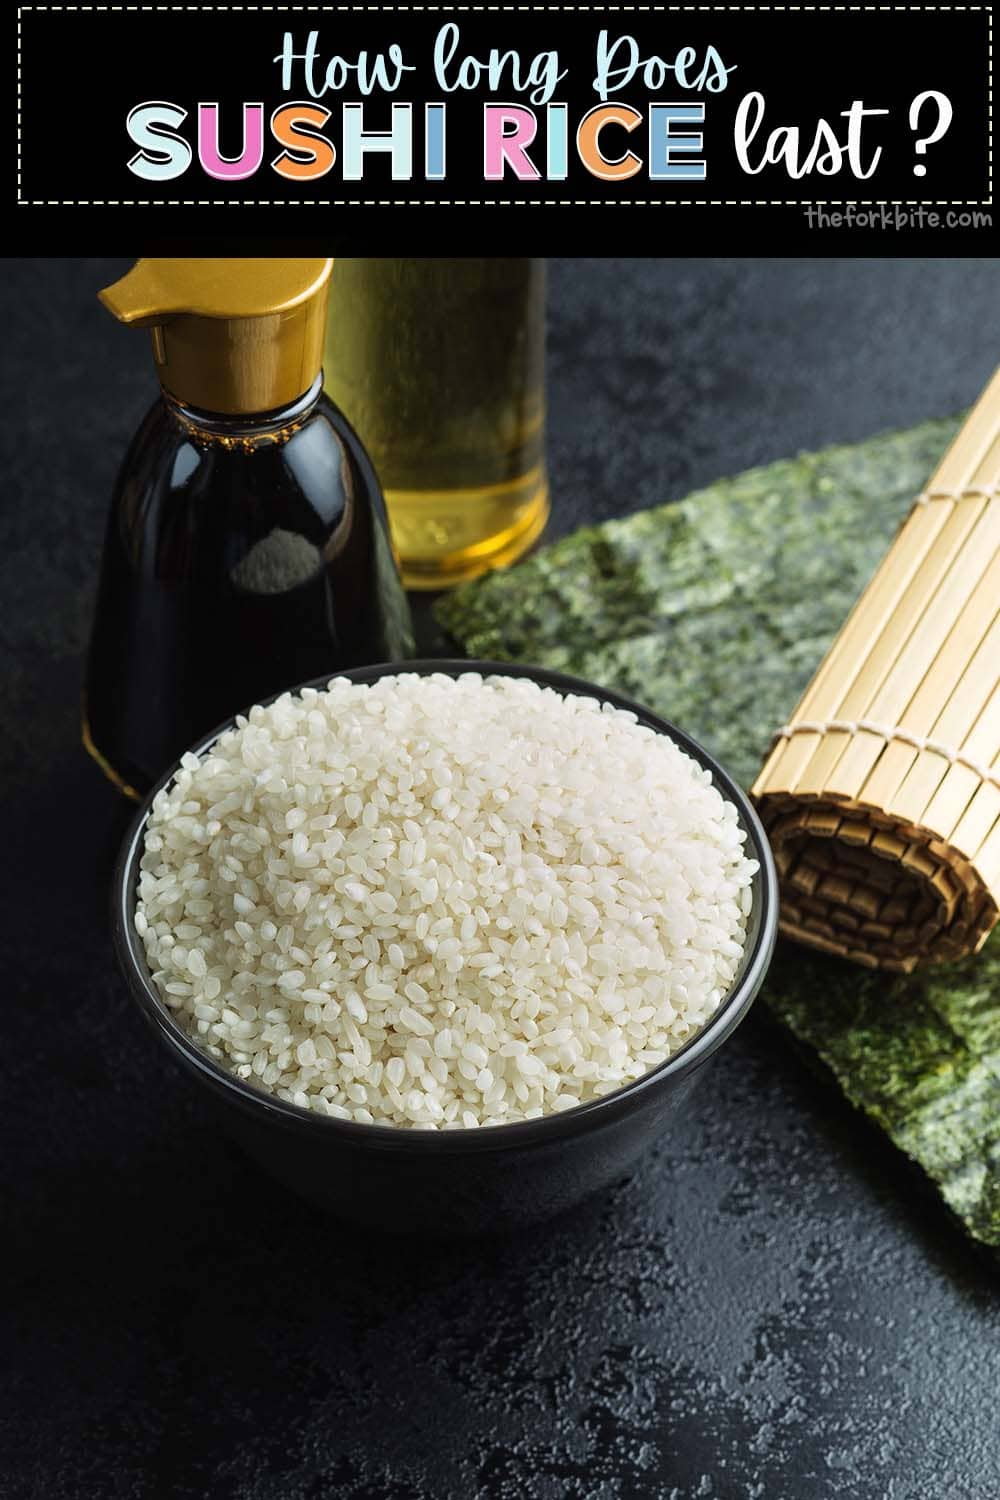 Once cooked, sushi rice can last anywhere from a few hours to several days. It hinges on whether it is stored, chilled, or frozen.